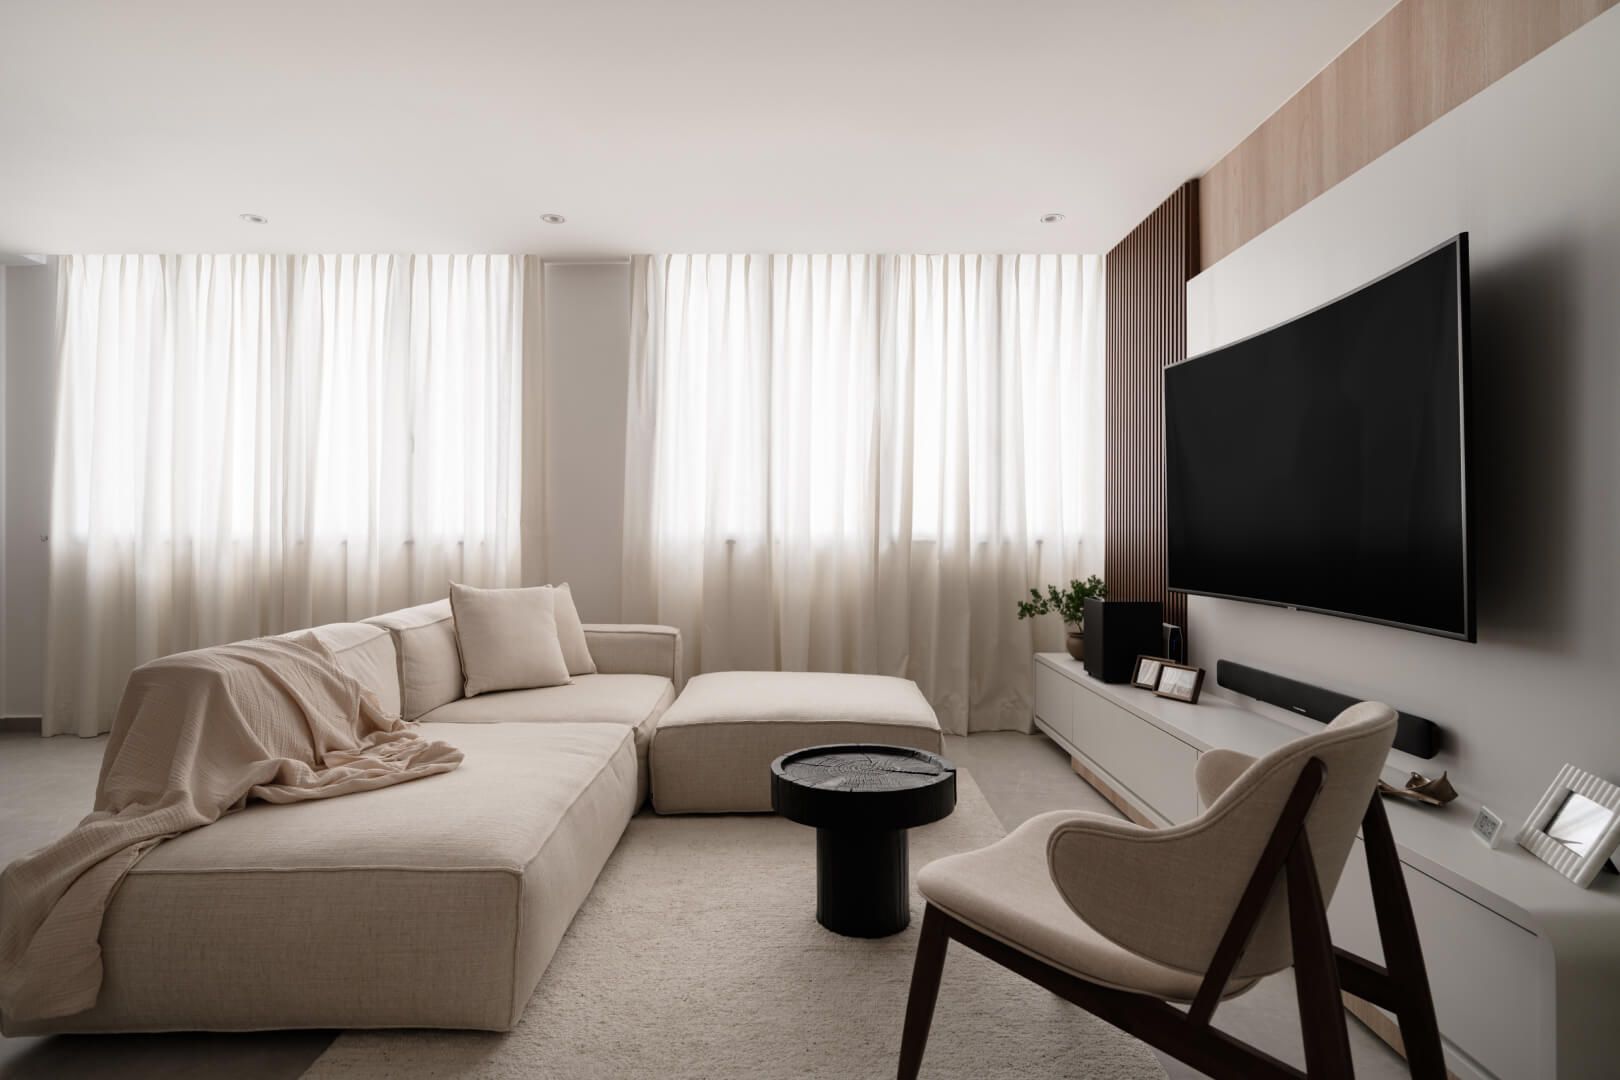 Elegant modern living room with a neutral color palette, featuring a plush sectional sofa, sheer curtains, and a minimalist entertainment unit.